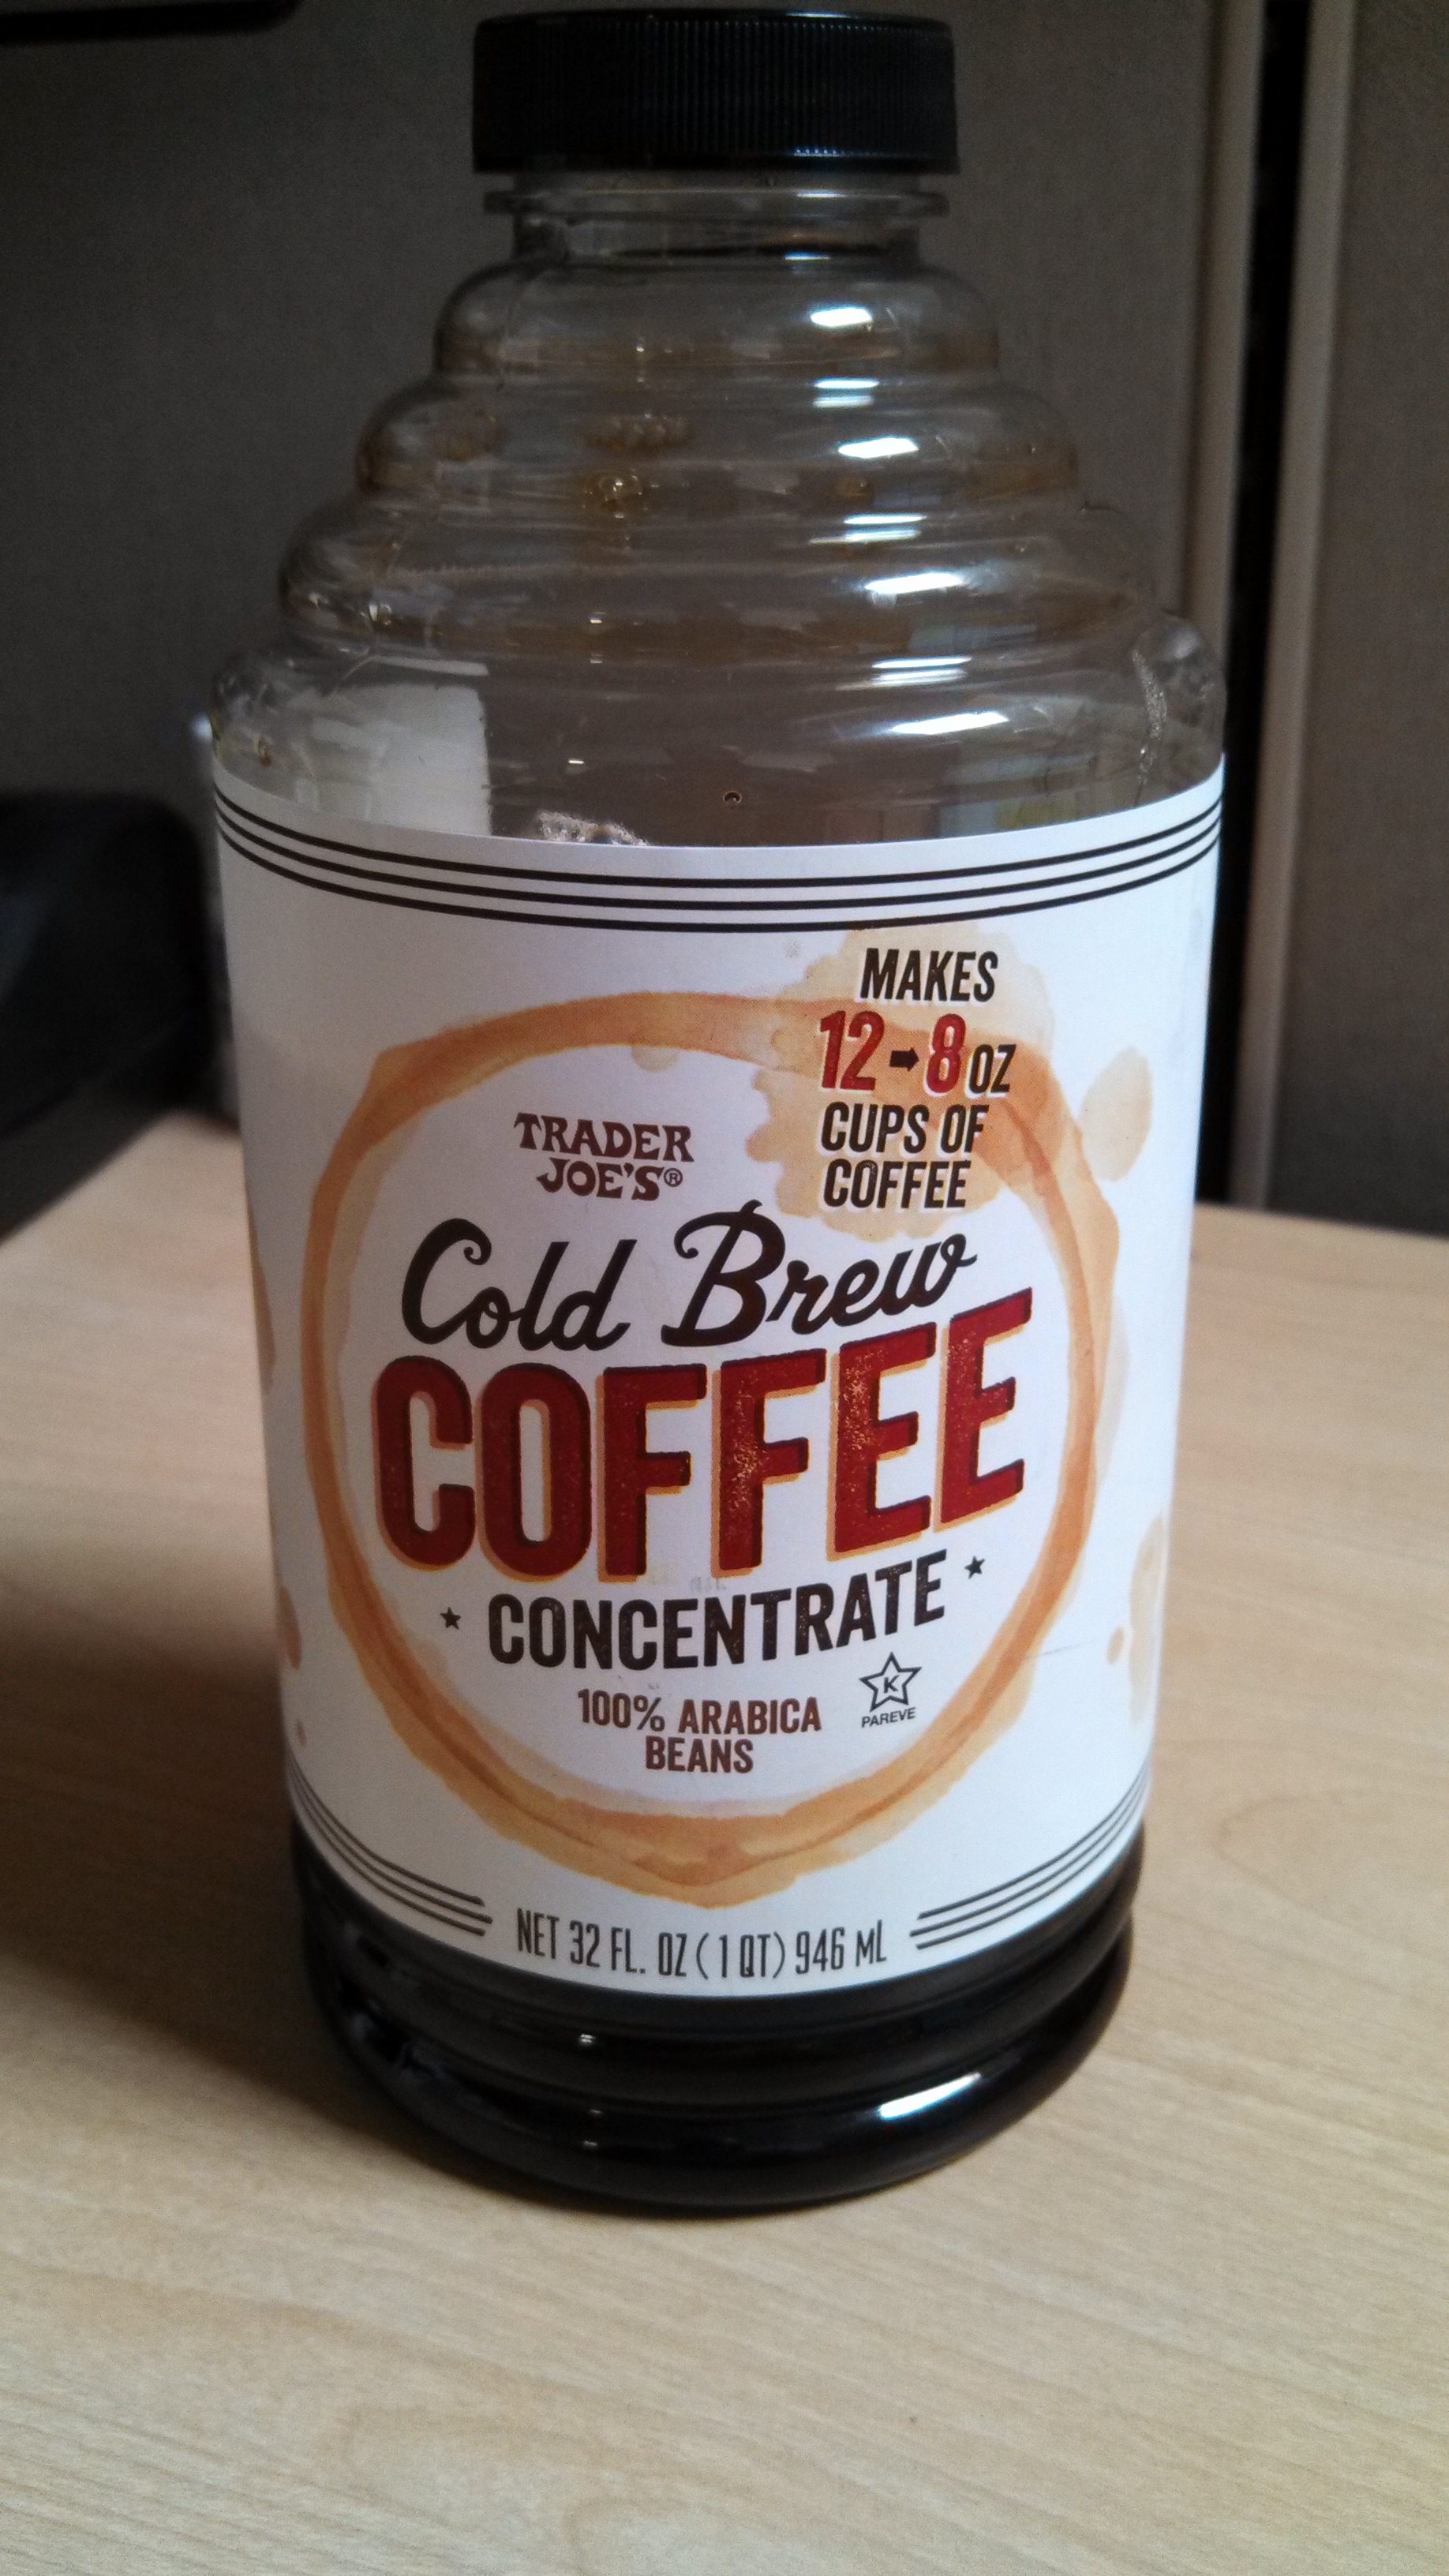 https://eatingatjoes.files.wordpress.com/2013/08/trader-joes-cold-brew-coffee-concentrate1.jpg